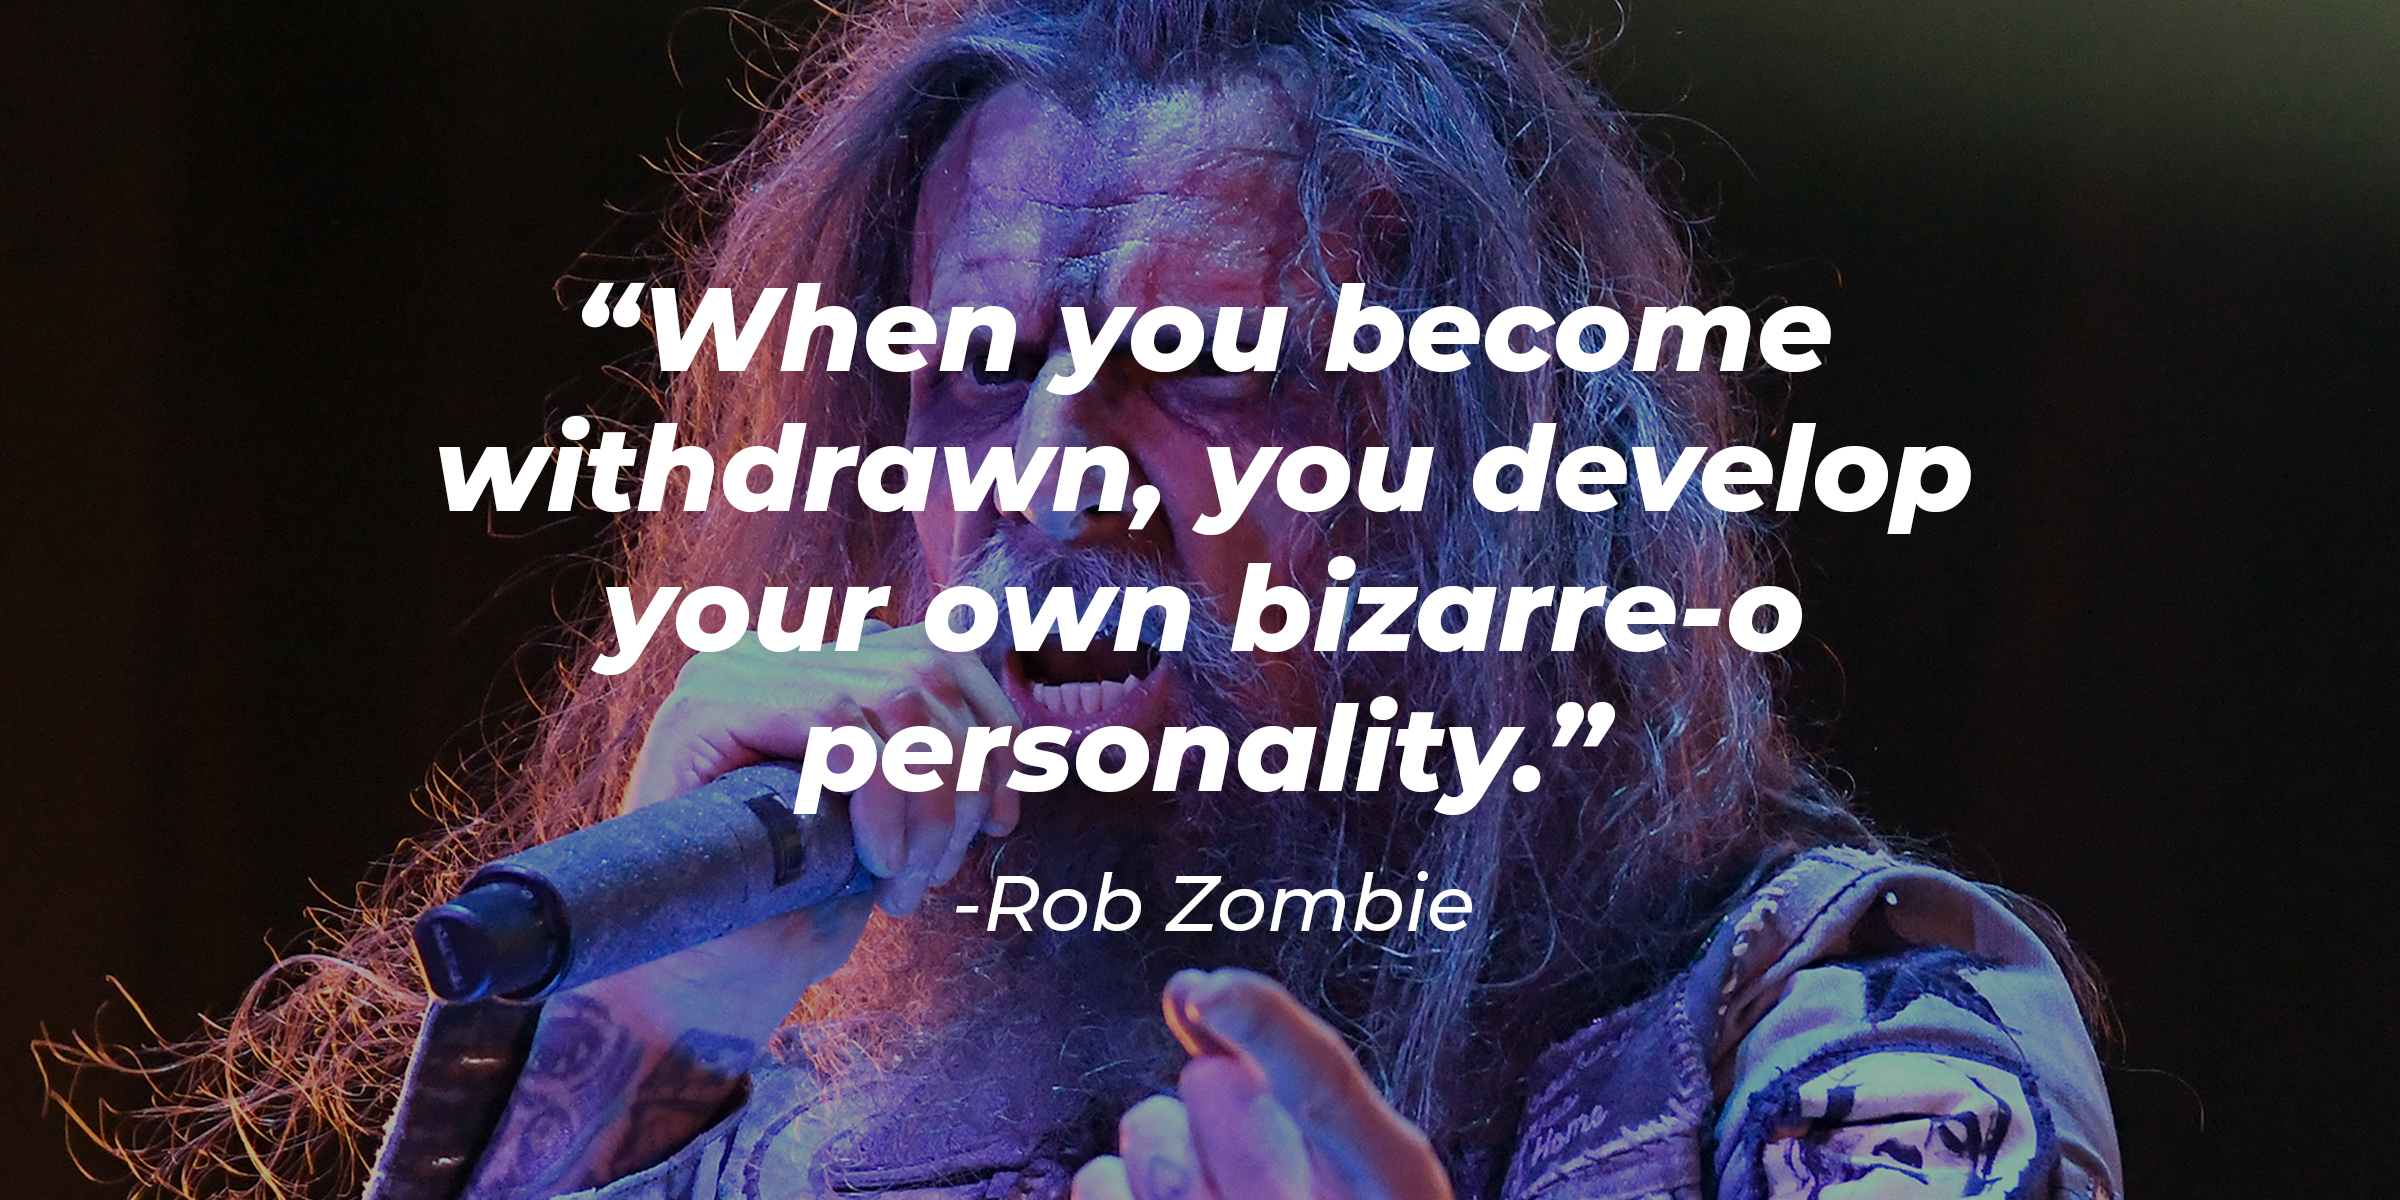 Rob Zombie with his quote: "When you become withdrawn, you develop your own bizarre-o personality." | Source: Getty Images